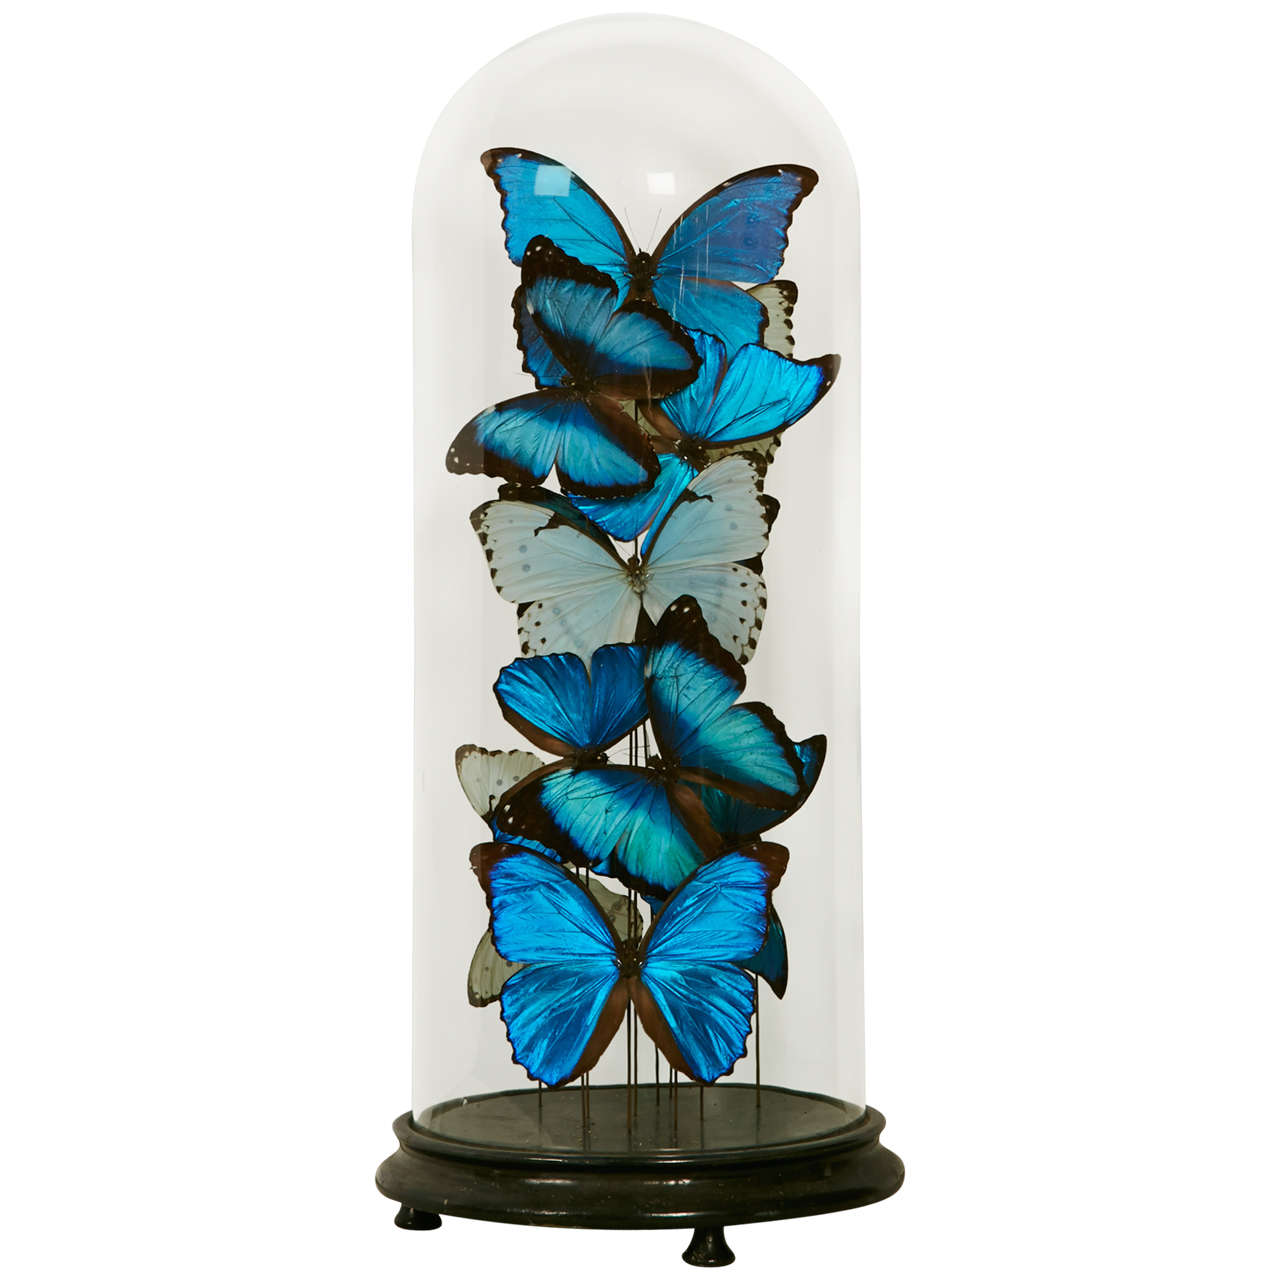 Collection of Mixed Morpho Butterflies under a Glass Dome